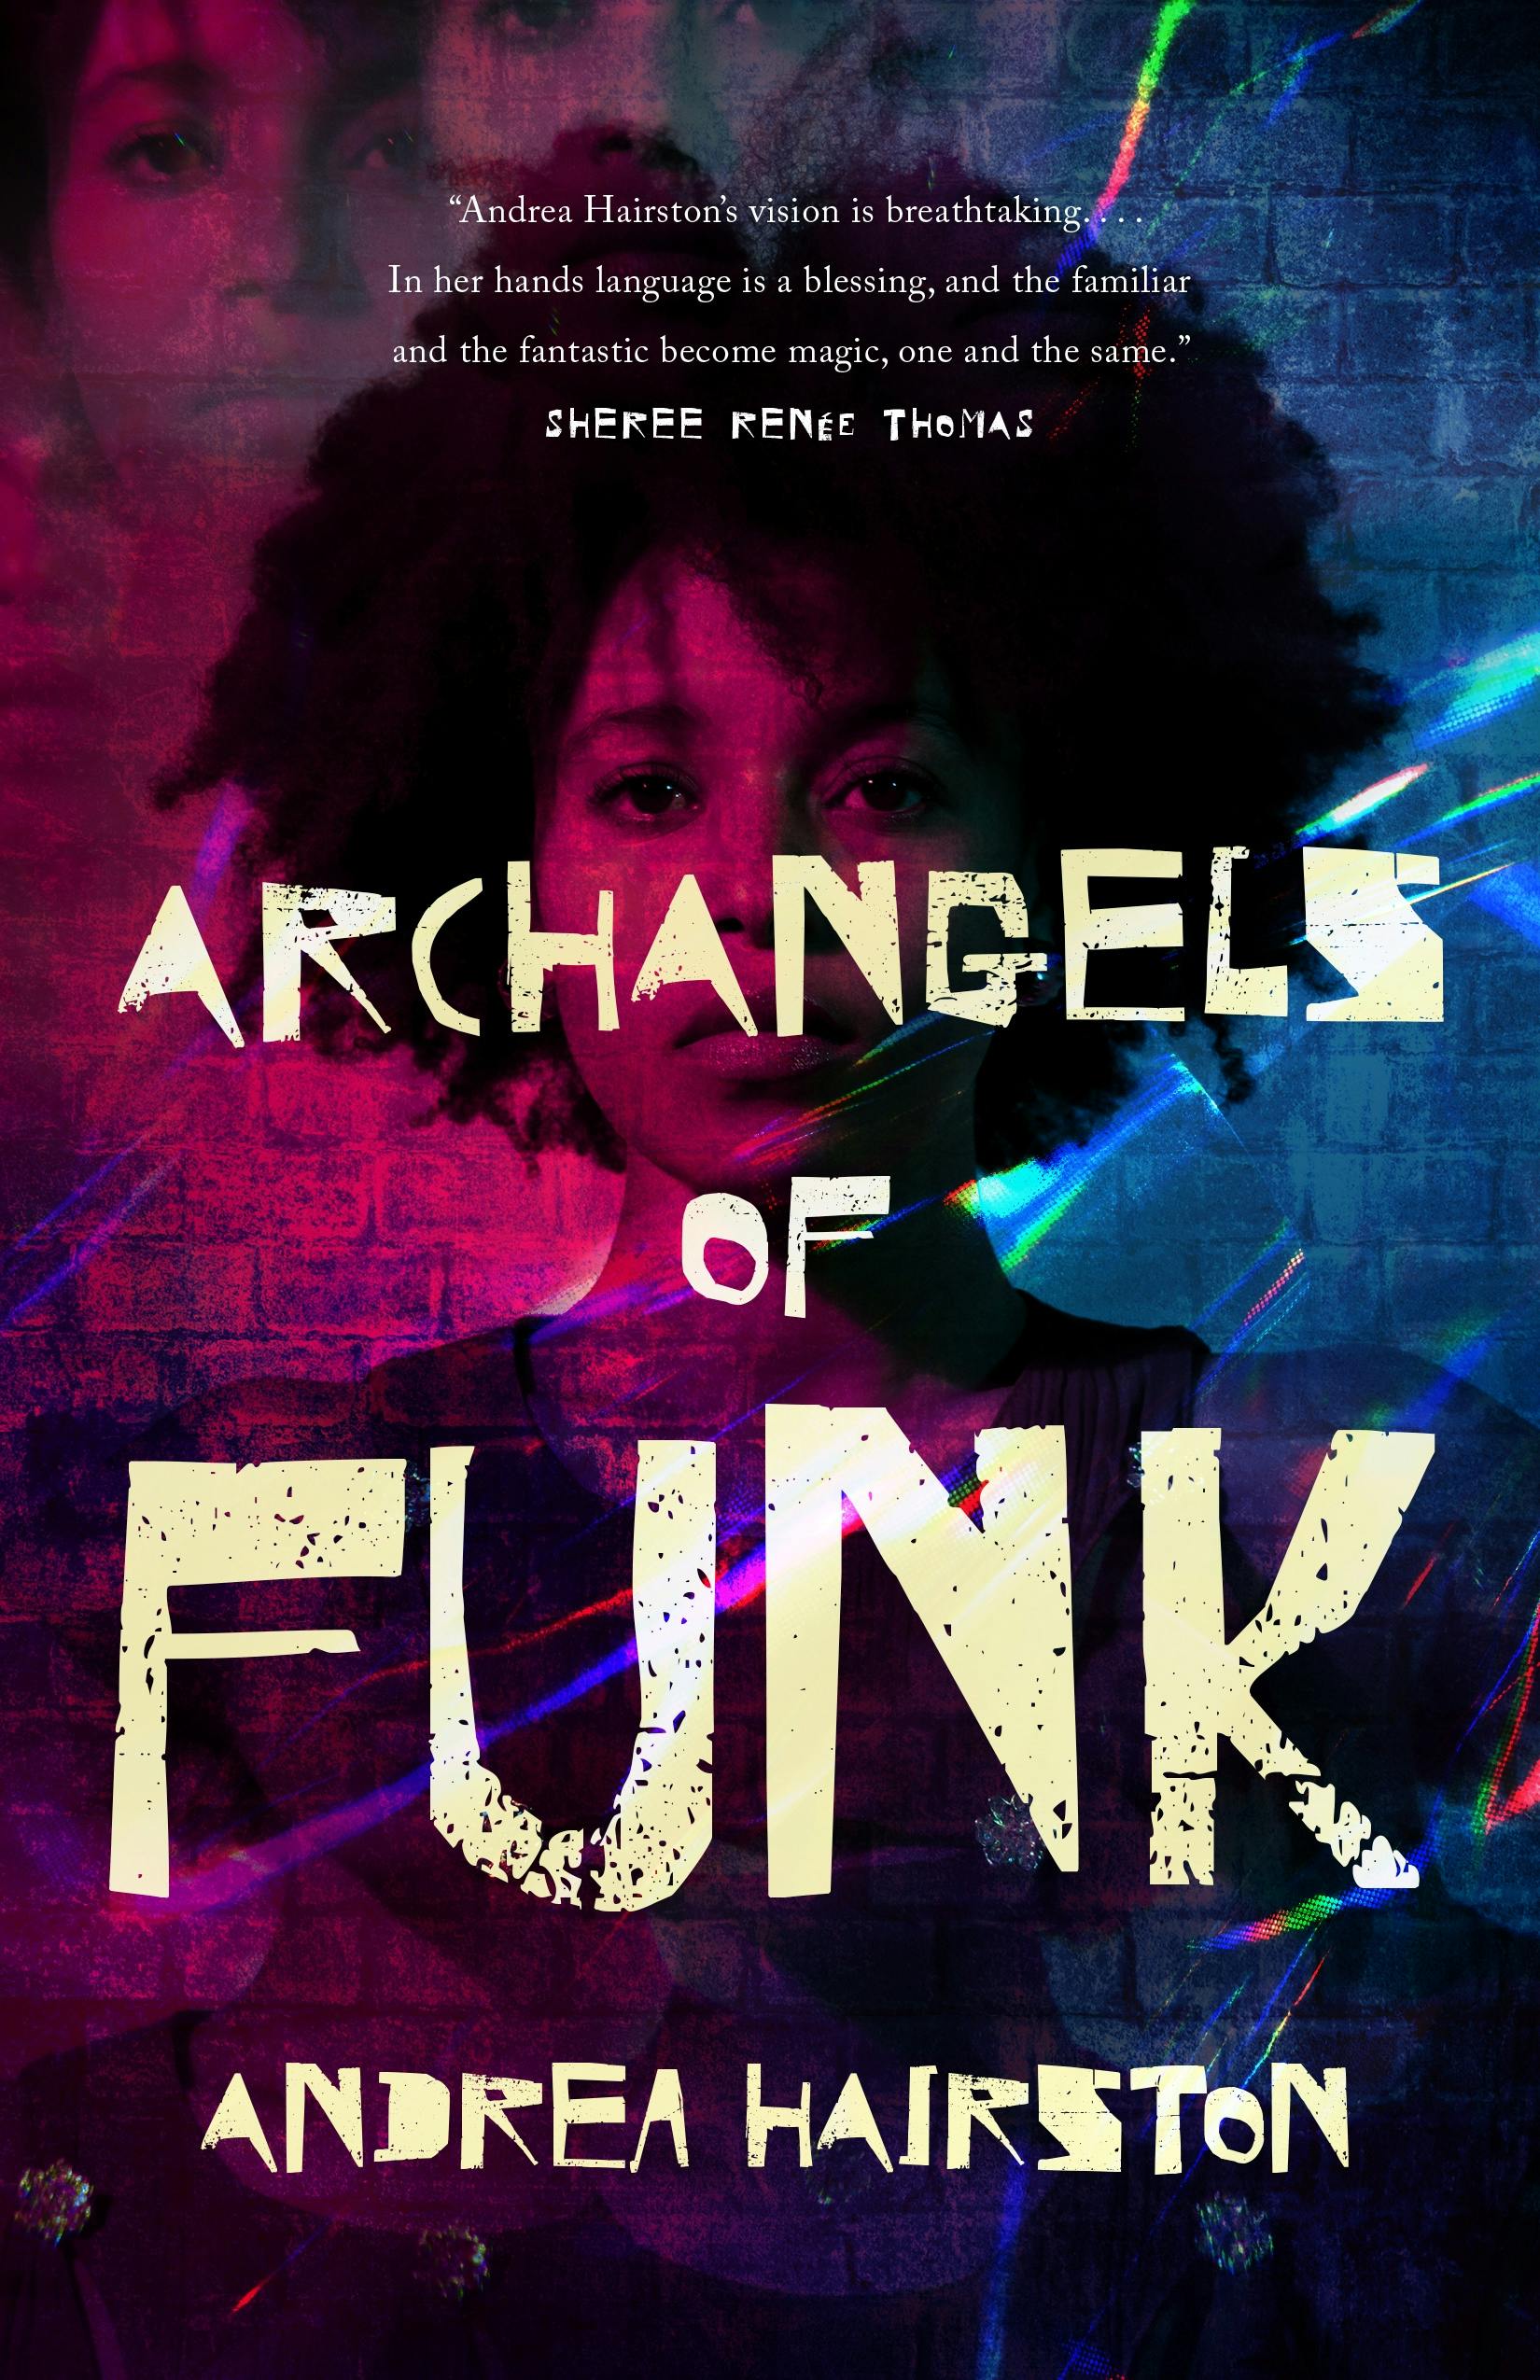 Cover for the book titled as: Archangels of Funk